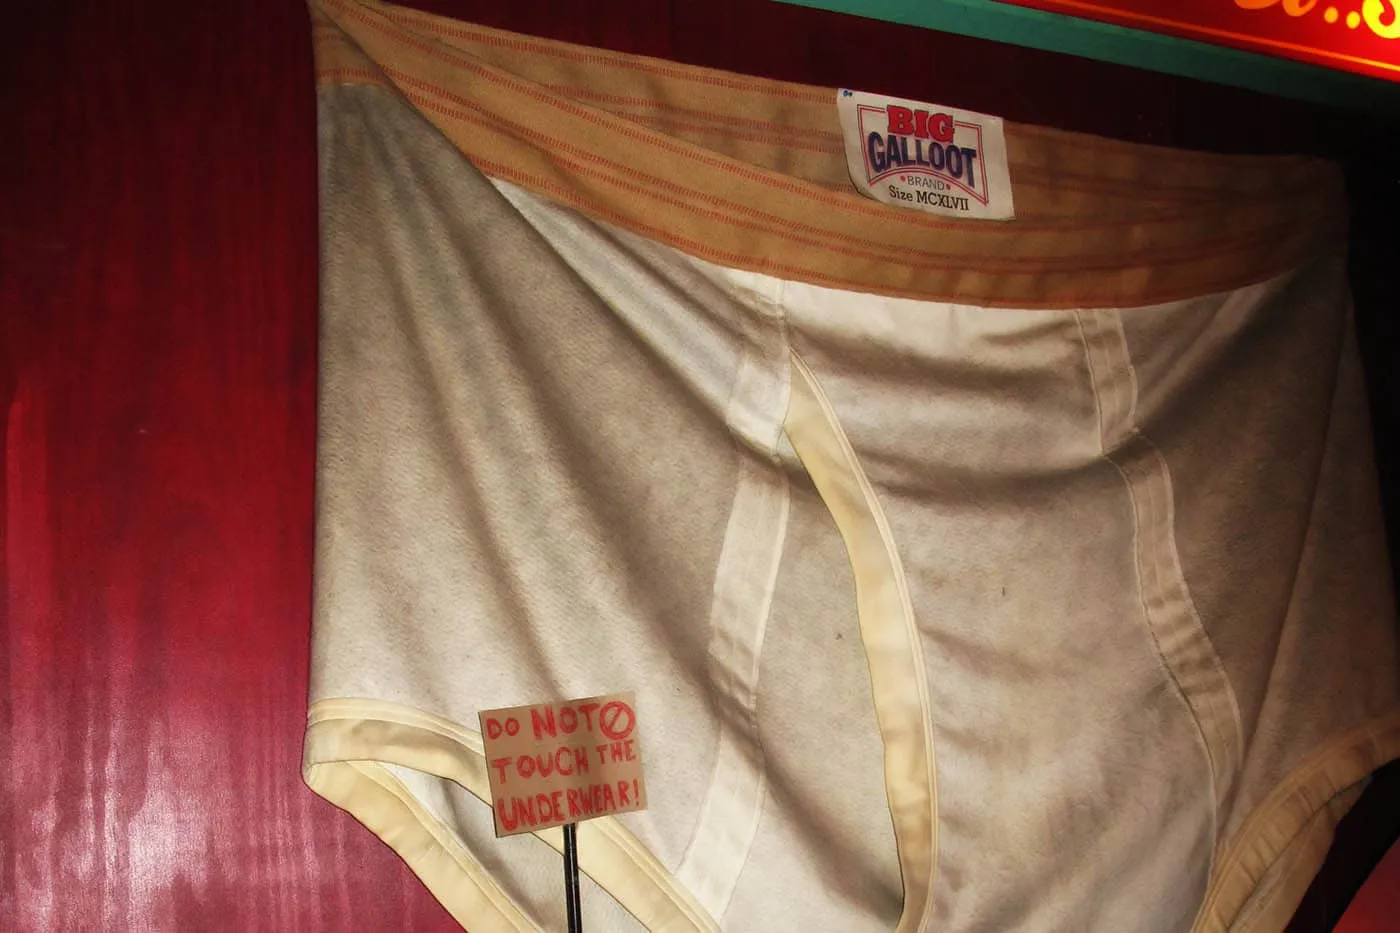 World's Largest Underwear at City Museum's Museum of Mirth, Mystery and Mayhem in St. Louis, Missouri.